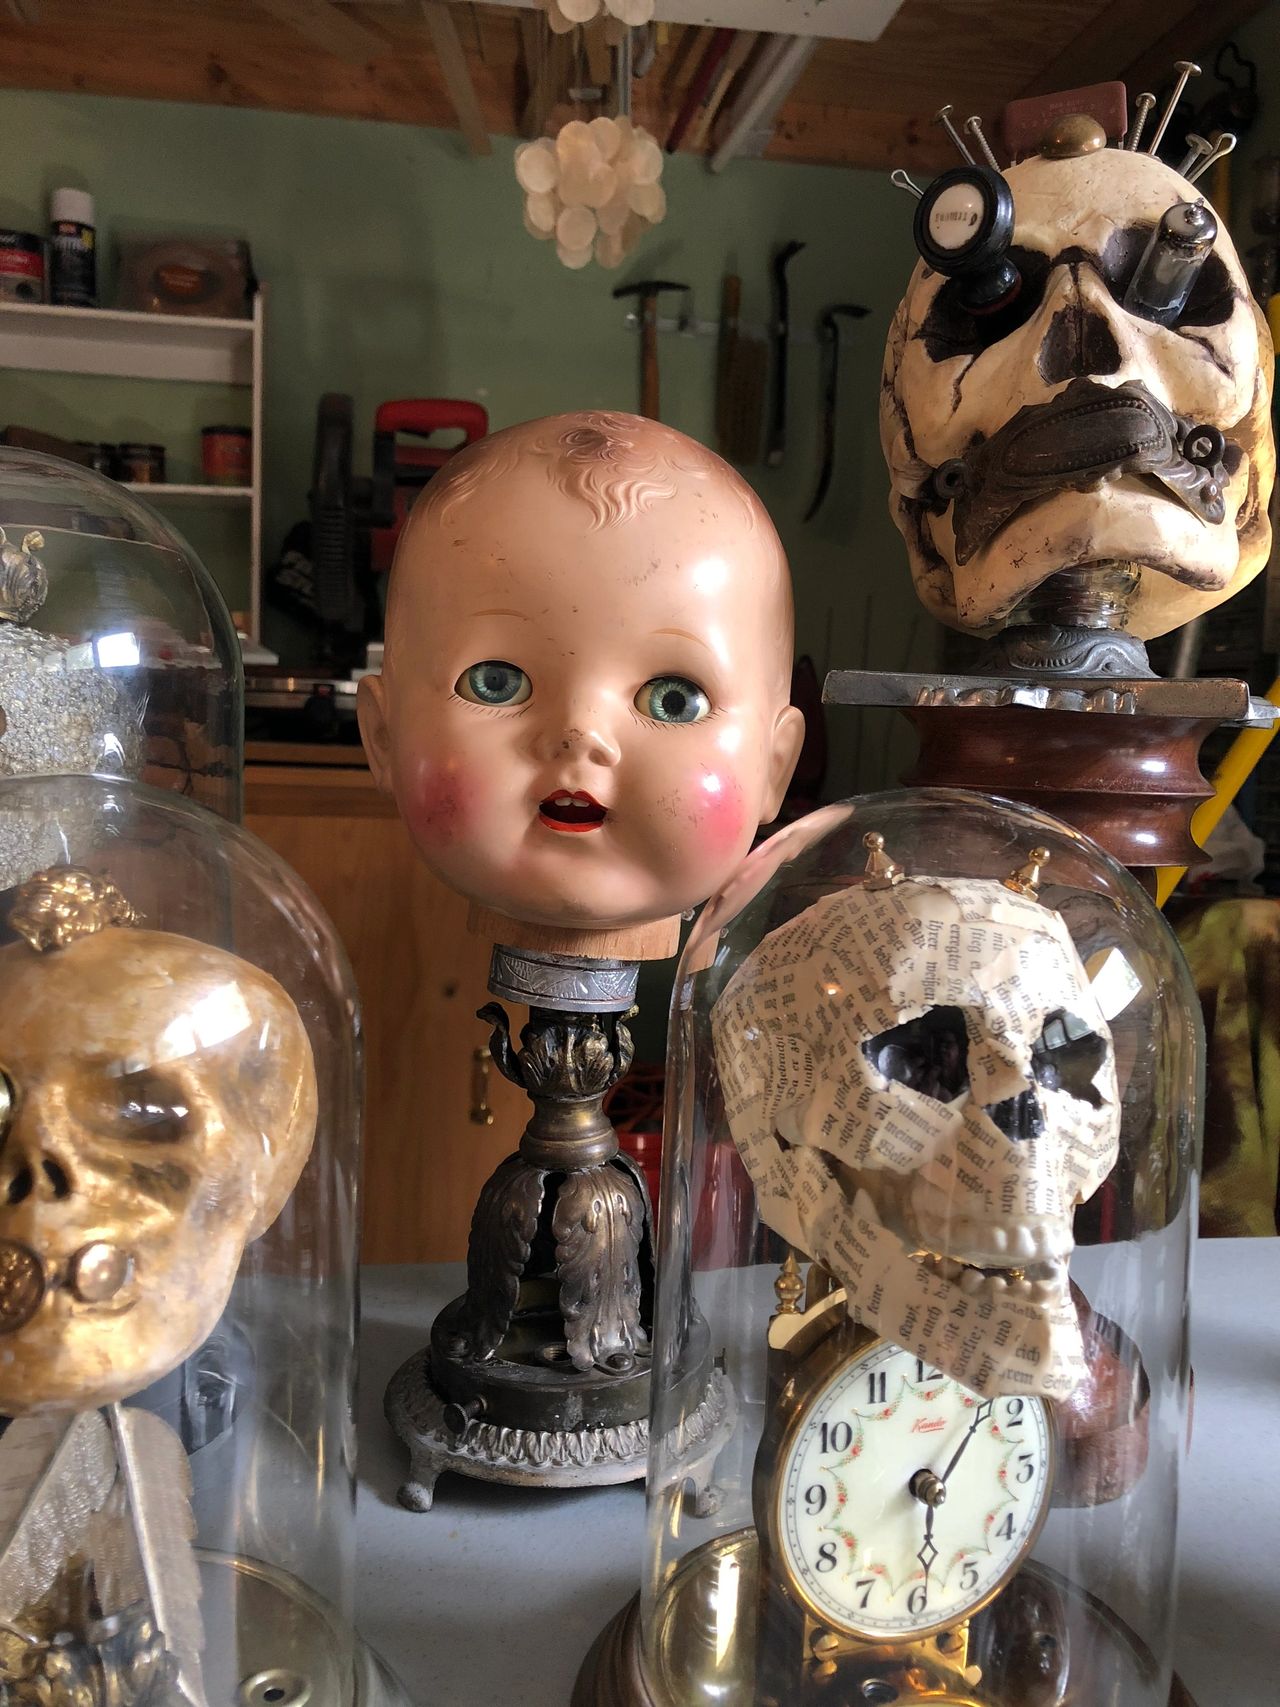 Creepy skulls and doll heads mounted on candlesticks.